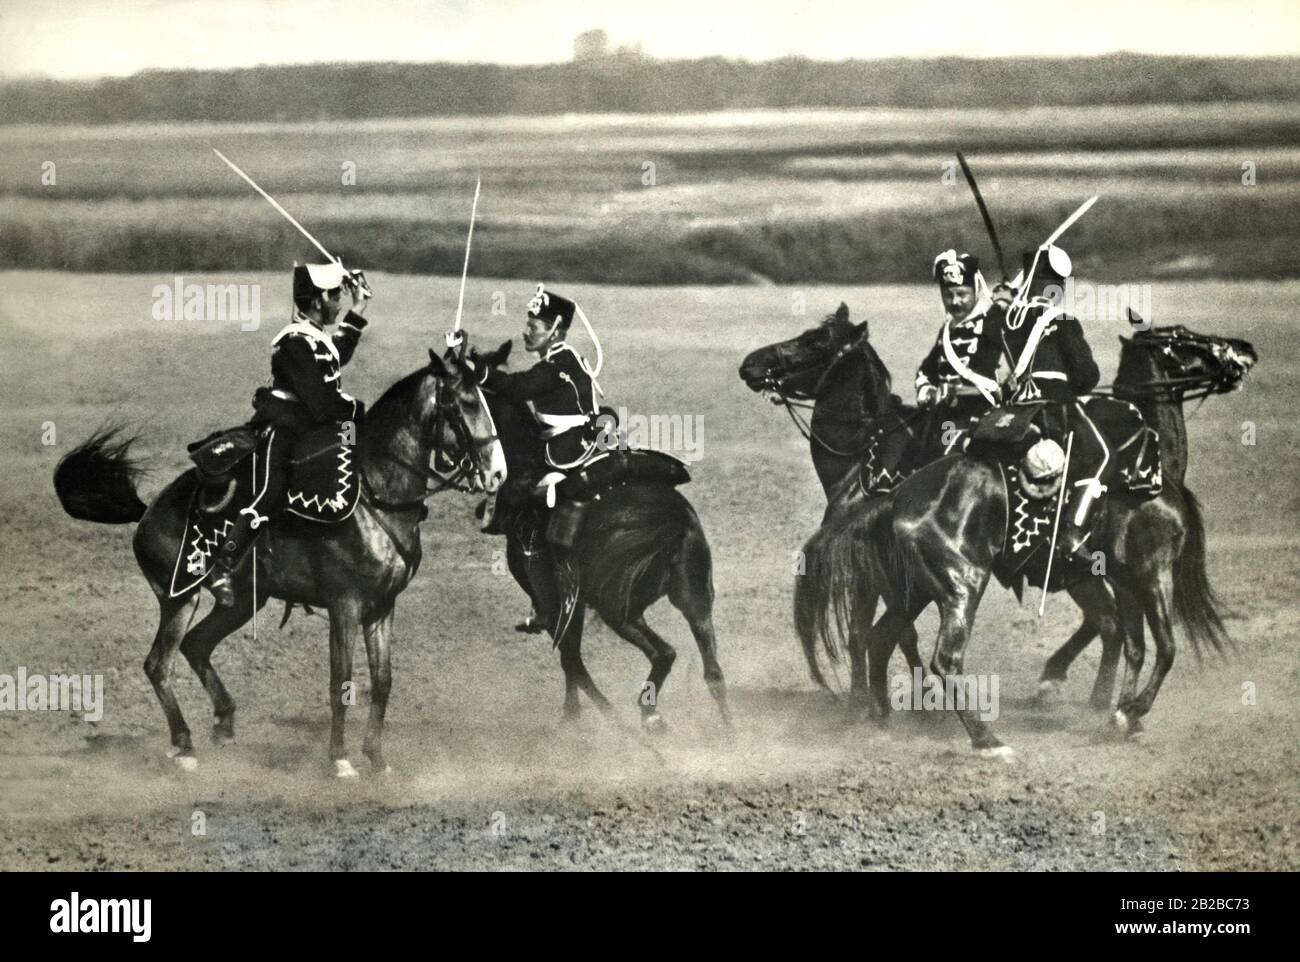 The famous Totenkopfhusaren (Death's Head Hussars), who were stationed in Gdansk, excelled in every manoeuvre with their skills in cavalry combat, although this cavalry training had become an anachronism since the invention of the machine gun and rapid-fire gun. Stock Photo